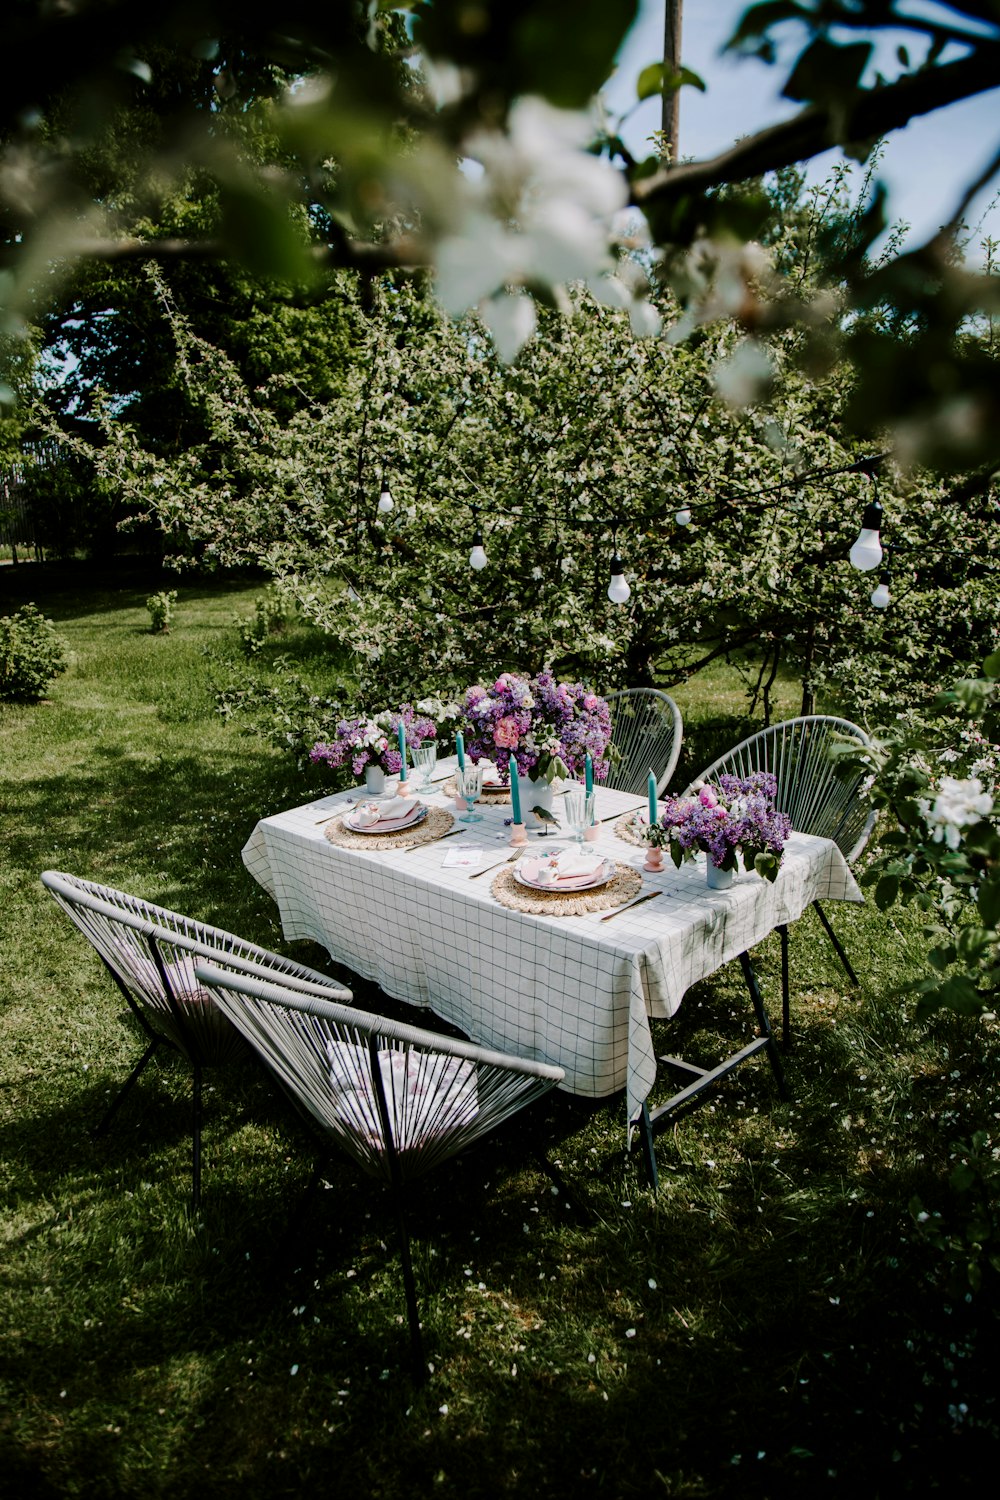 a table with plates and glasses on it in a yard with trees